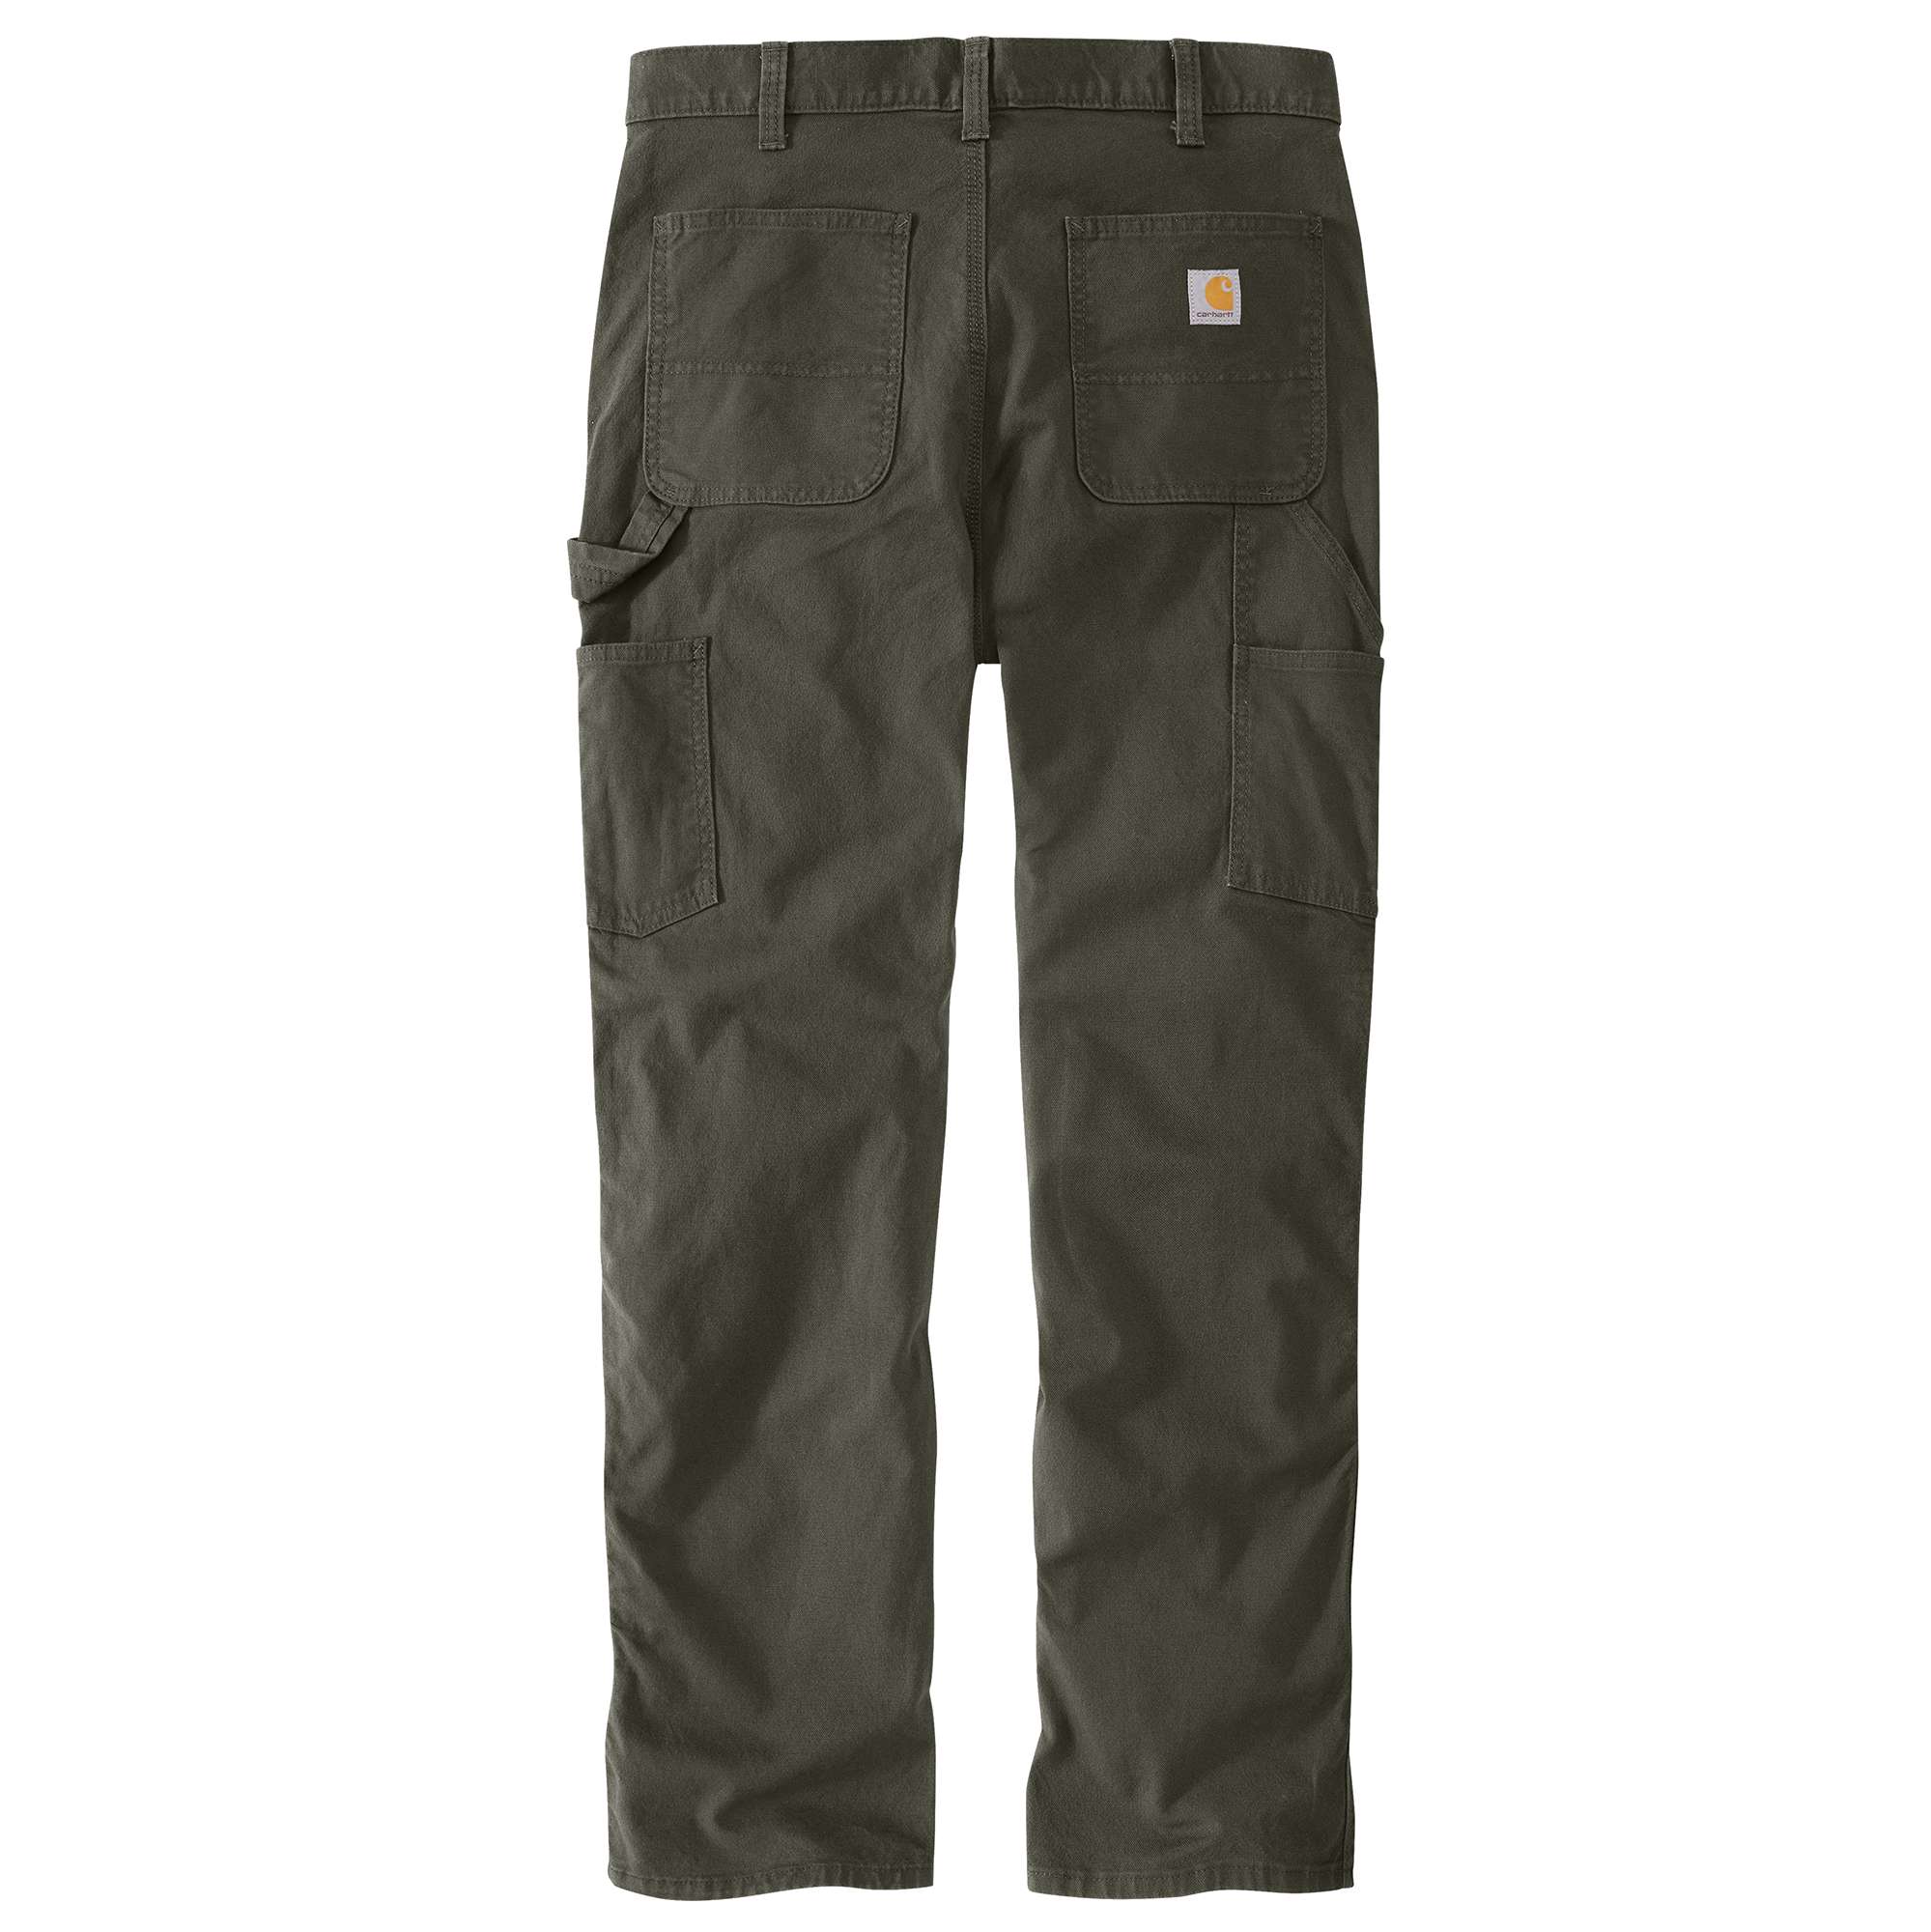 Carhartt Pants Mens 36x34 Relaxed Fit Duck Double Front Rugged Flex Utility  New